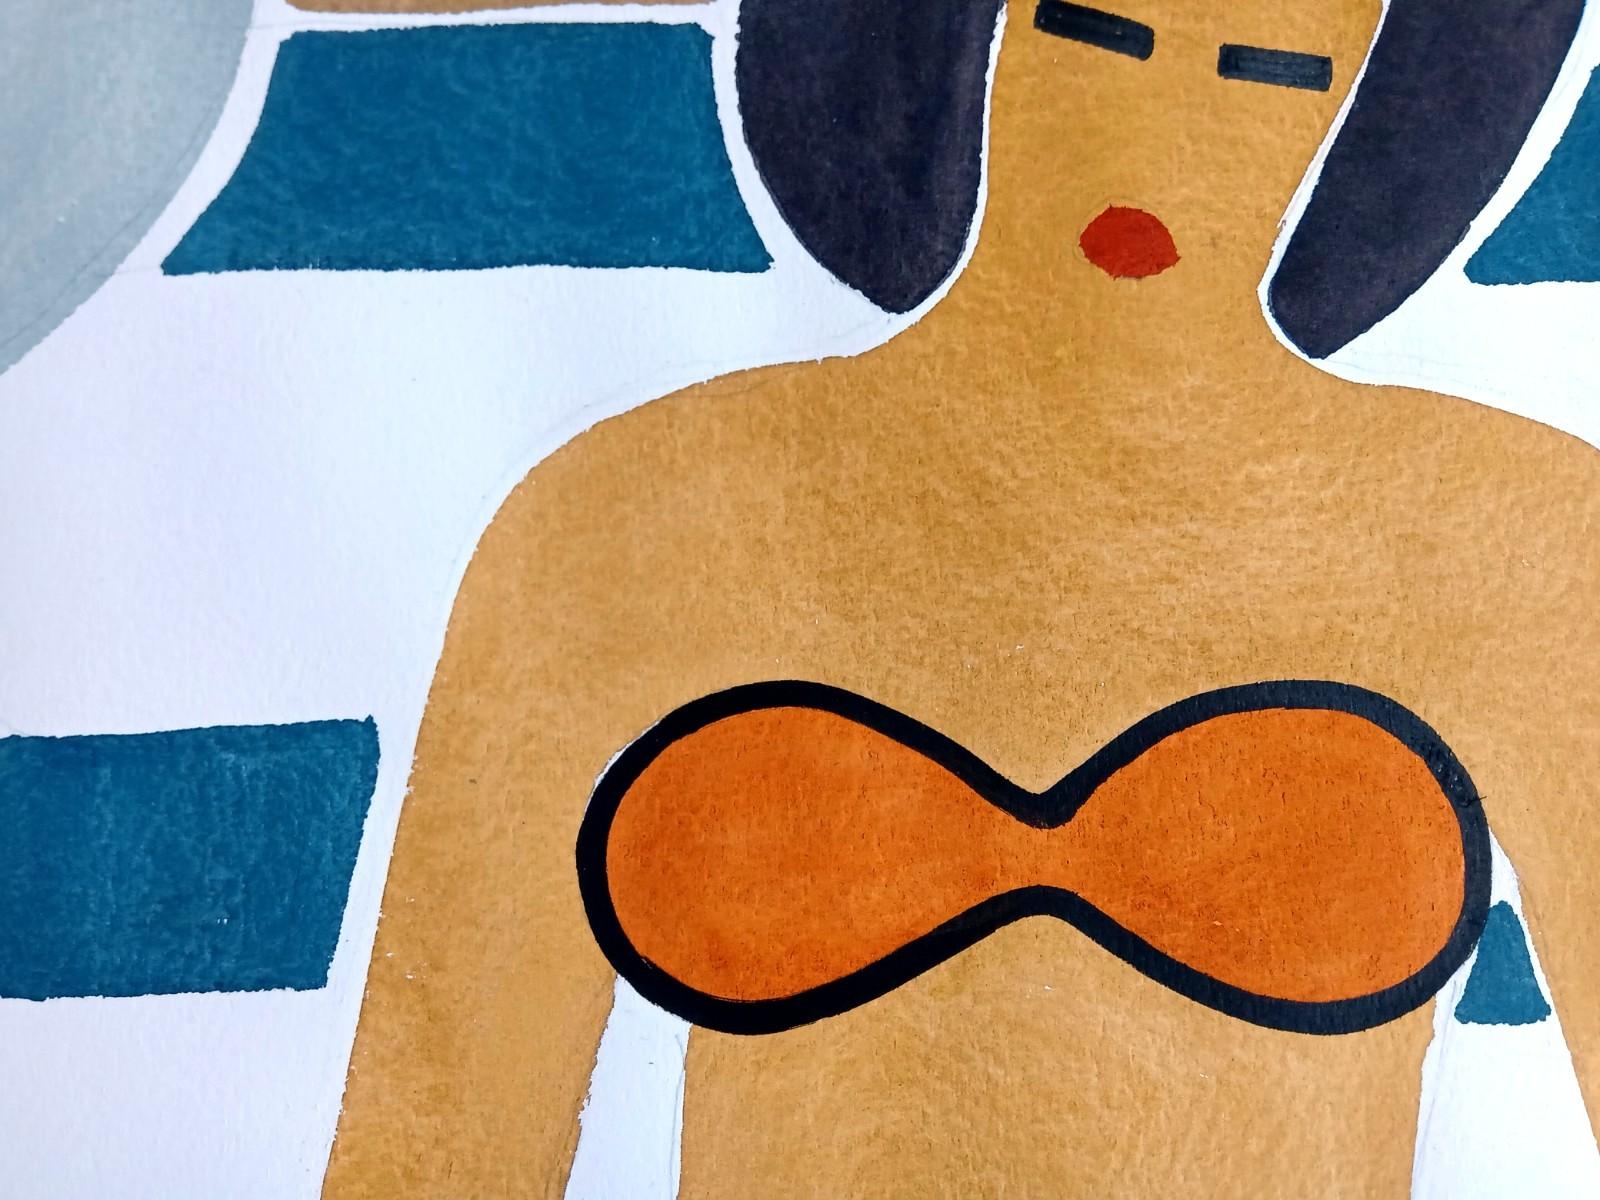 This captivating piece titled 'Orange Bikini Swimmer on the Sand' beckons for a contemplative pause. The figurative drawing in watercolor, with ink accents on paper, captures the tranquil essence of a woman lying on a beach. Delicate color nuances